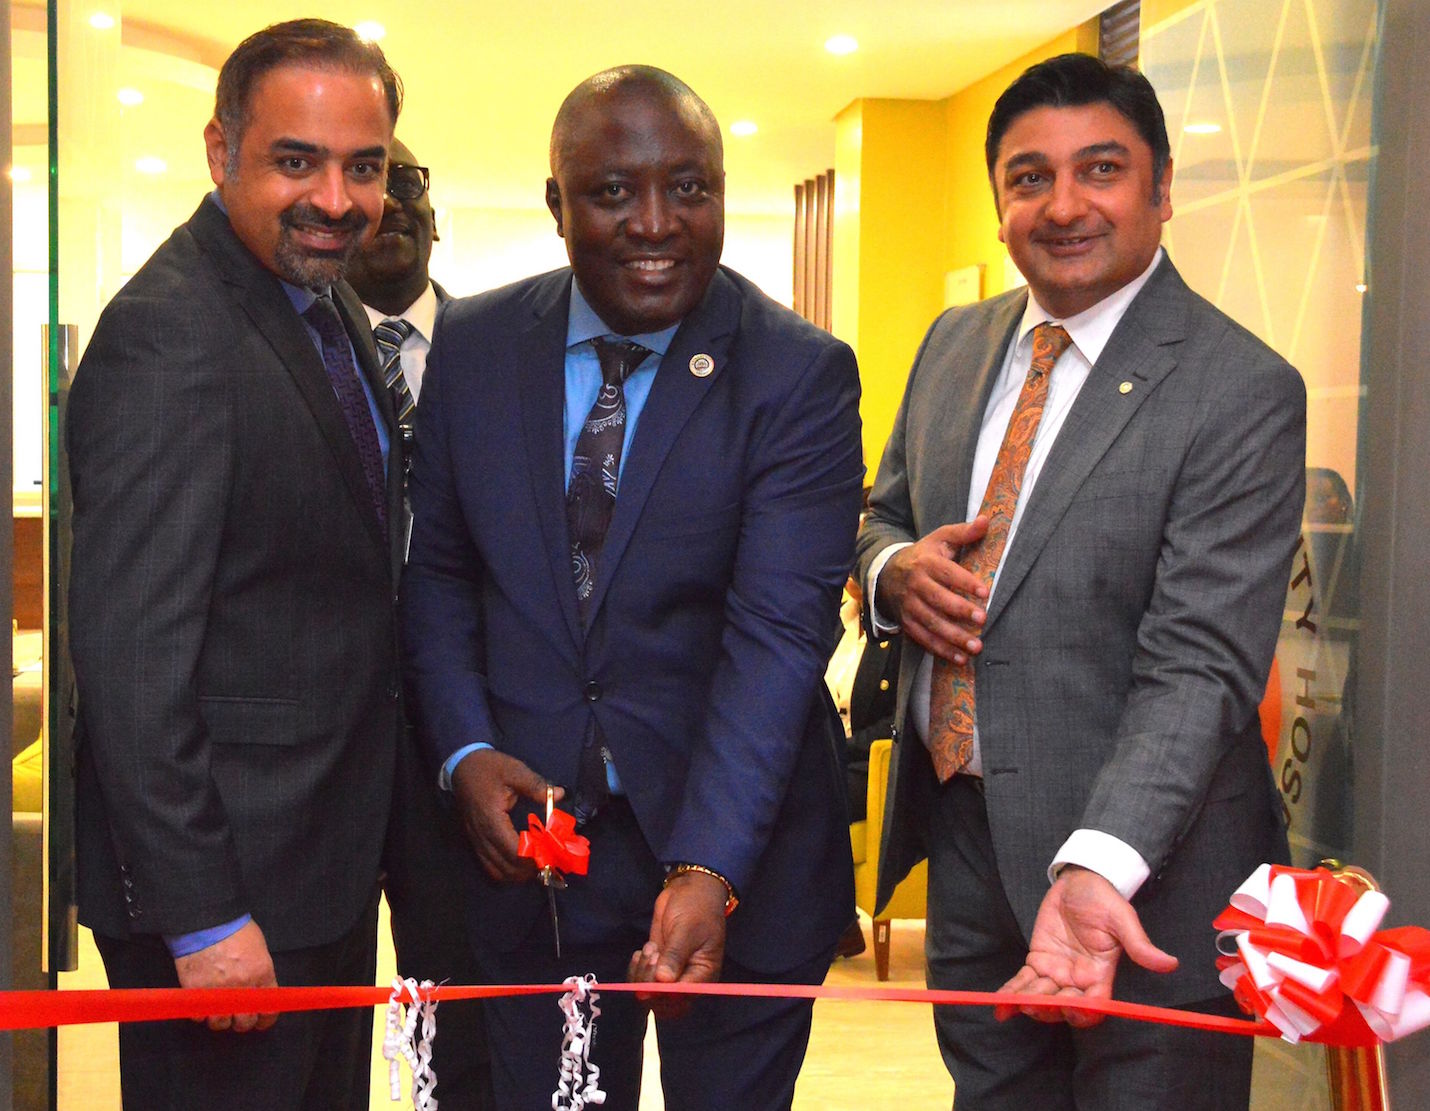 Nairobi County Ag. Secretary Patrick Analo officially opens the Karen Specialty and Executive Clinic. With him is the Aga Khan University Hospital CEO Rashid Khalani and COO of Outreach Network Khurram Jamal. The facility is part of the Aga Khan University Hospital’s strategy to bring specialized care closer to the community.